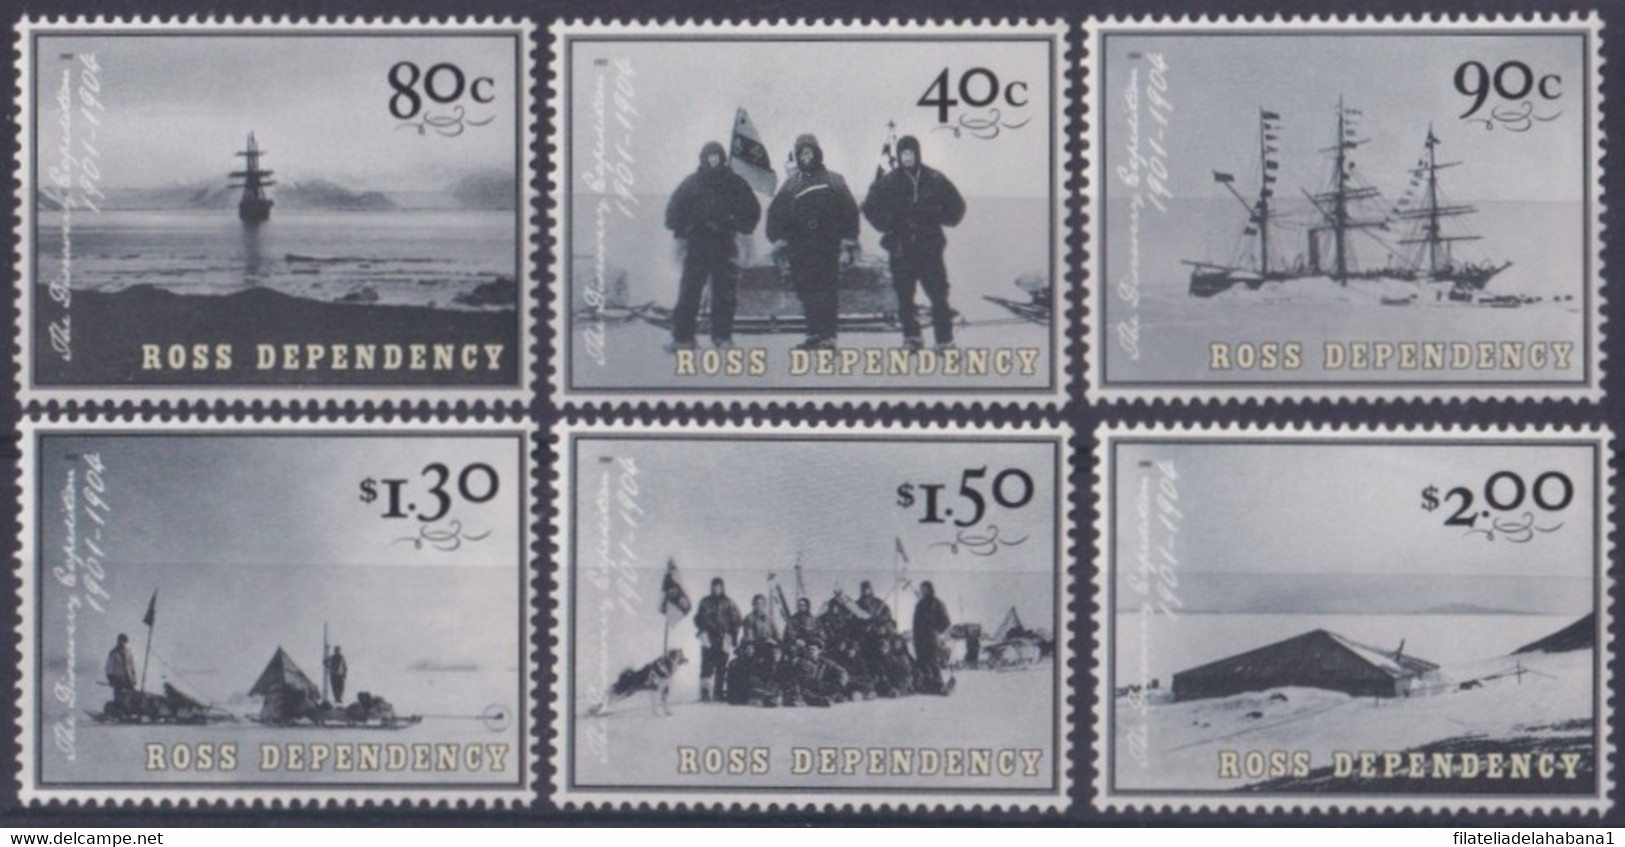 F-EX33156 ROSS POLAR ANTARCTIC 2002 MNH DISCOVERY EXPEDITION 1901-04 SHIP. - Programmes Scientifiques